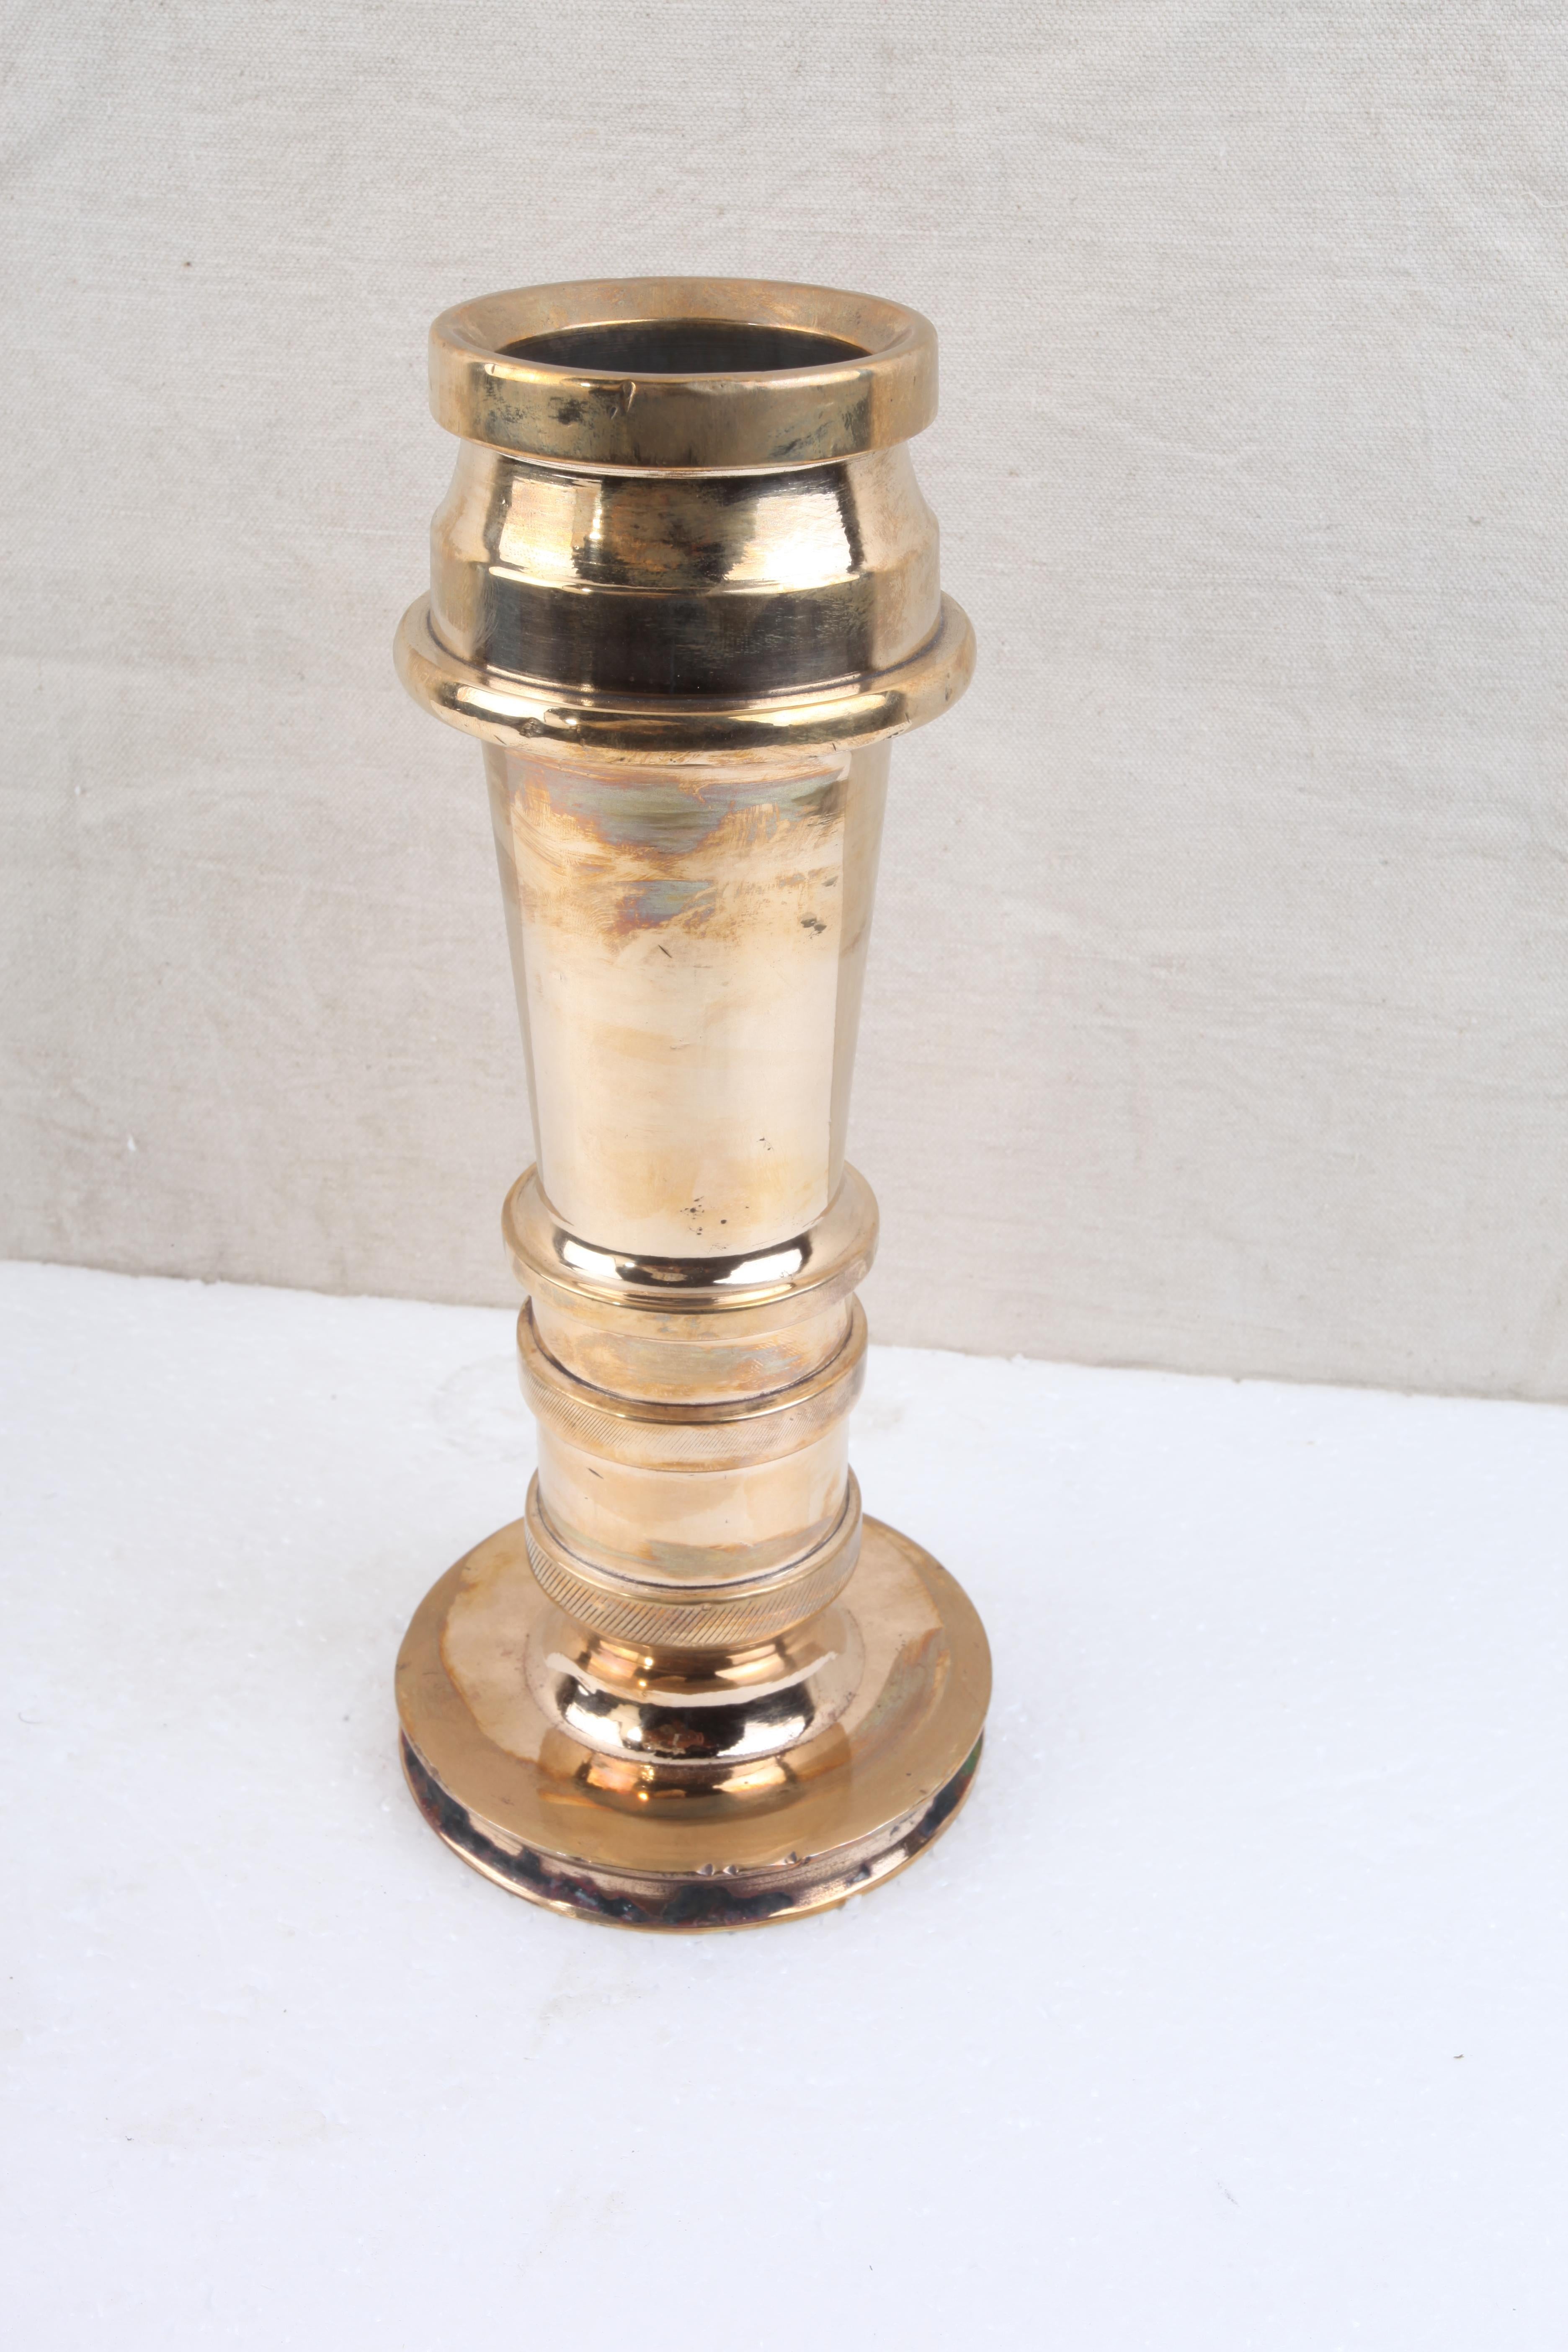 Now here's an unusual re-purposing. Solid brass fire-hose nozzles that have been converted to candle-stands or flower vases. I had the holes closed up so that they could hold water. Incredibly solid weight in cast brass at 8 pounds each. Groove